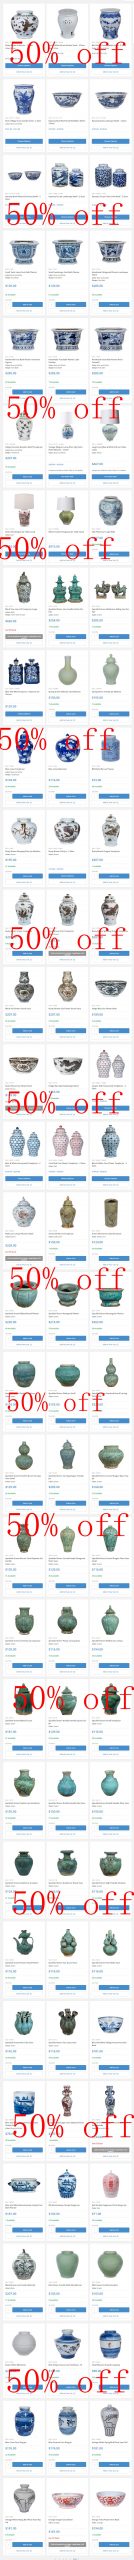 legend of asia sells all porcelain products at half price